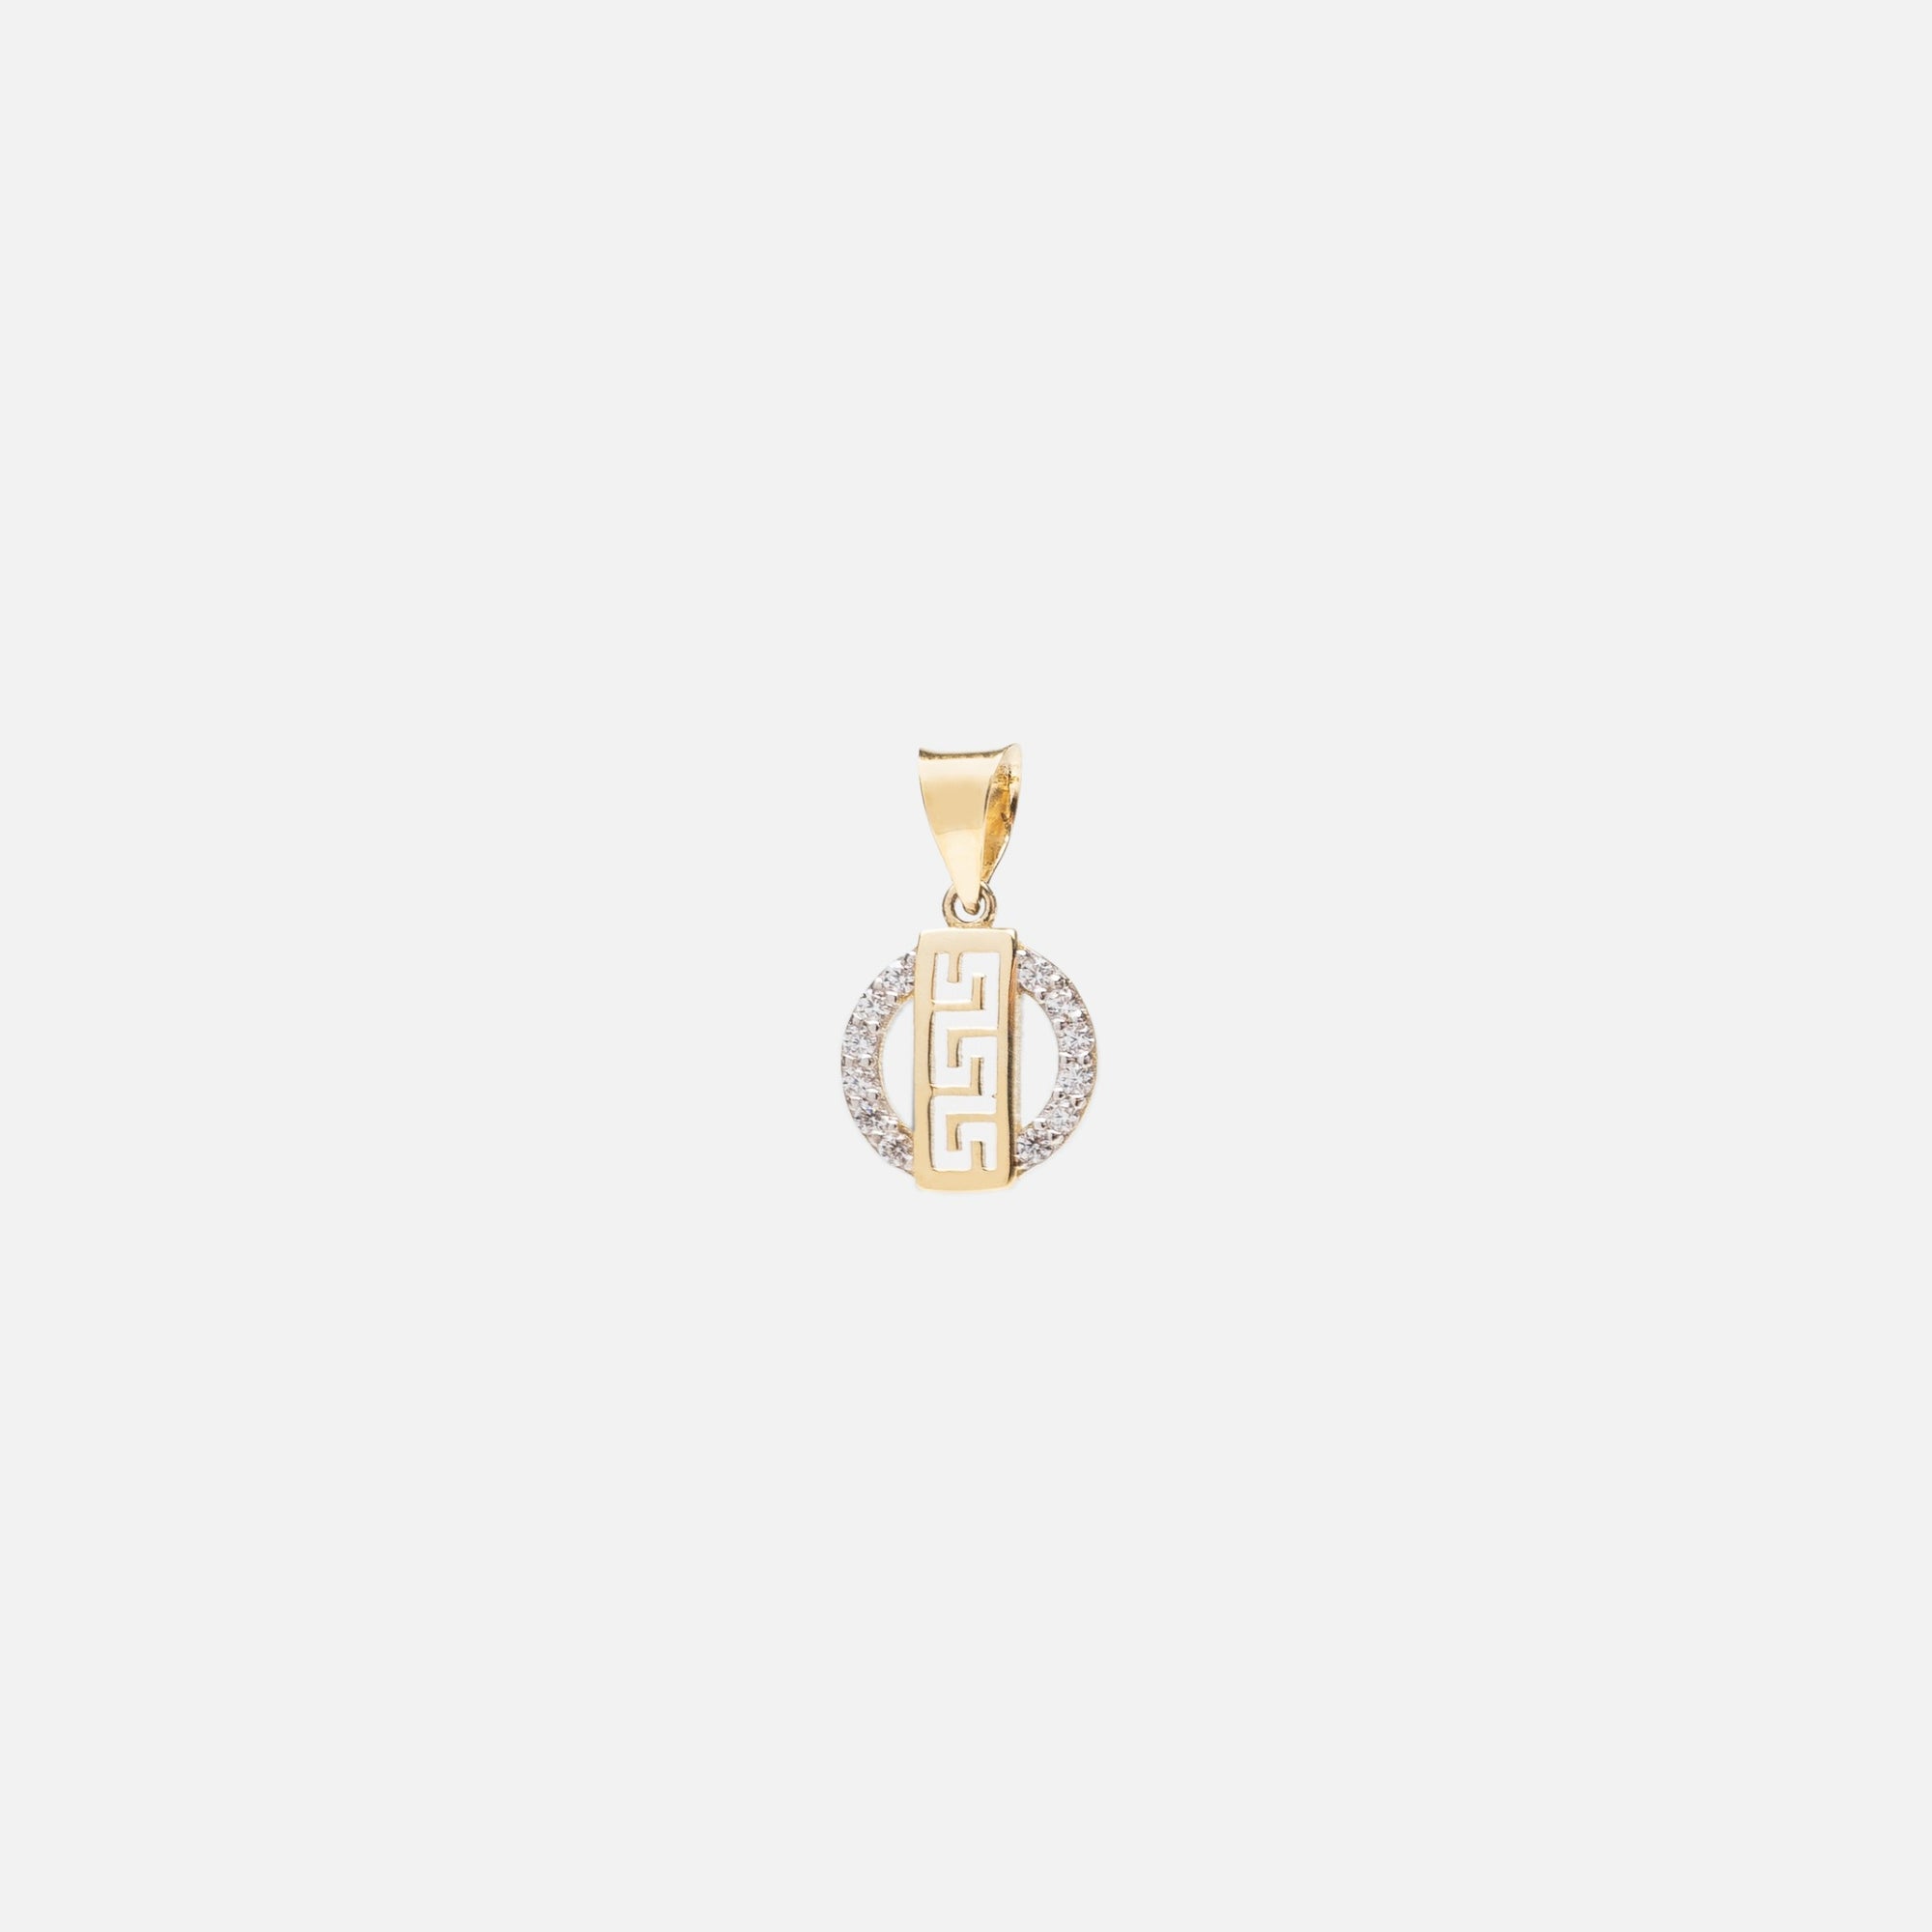 10k yellow gold circle charm with stones